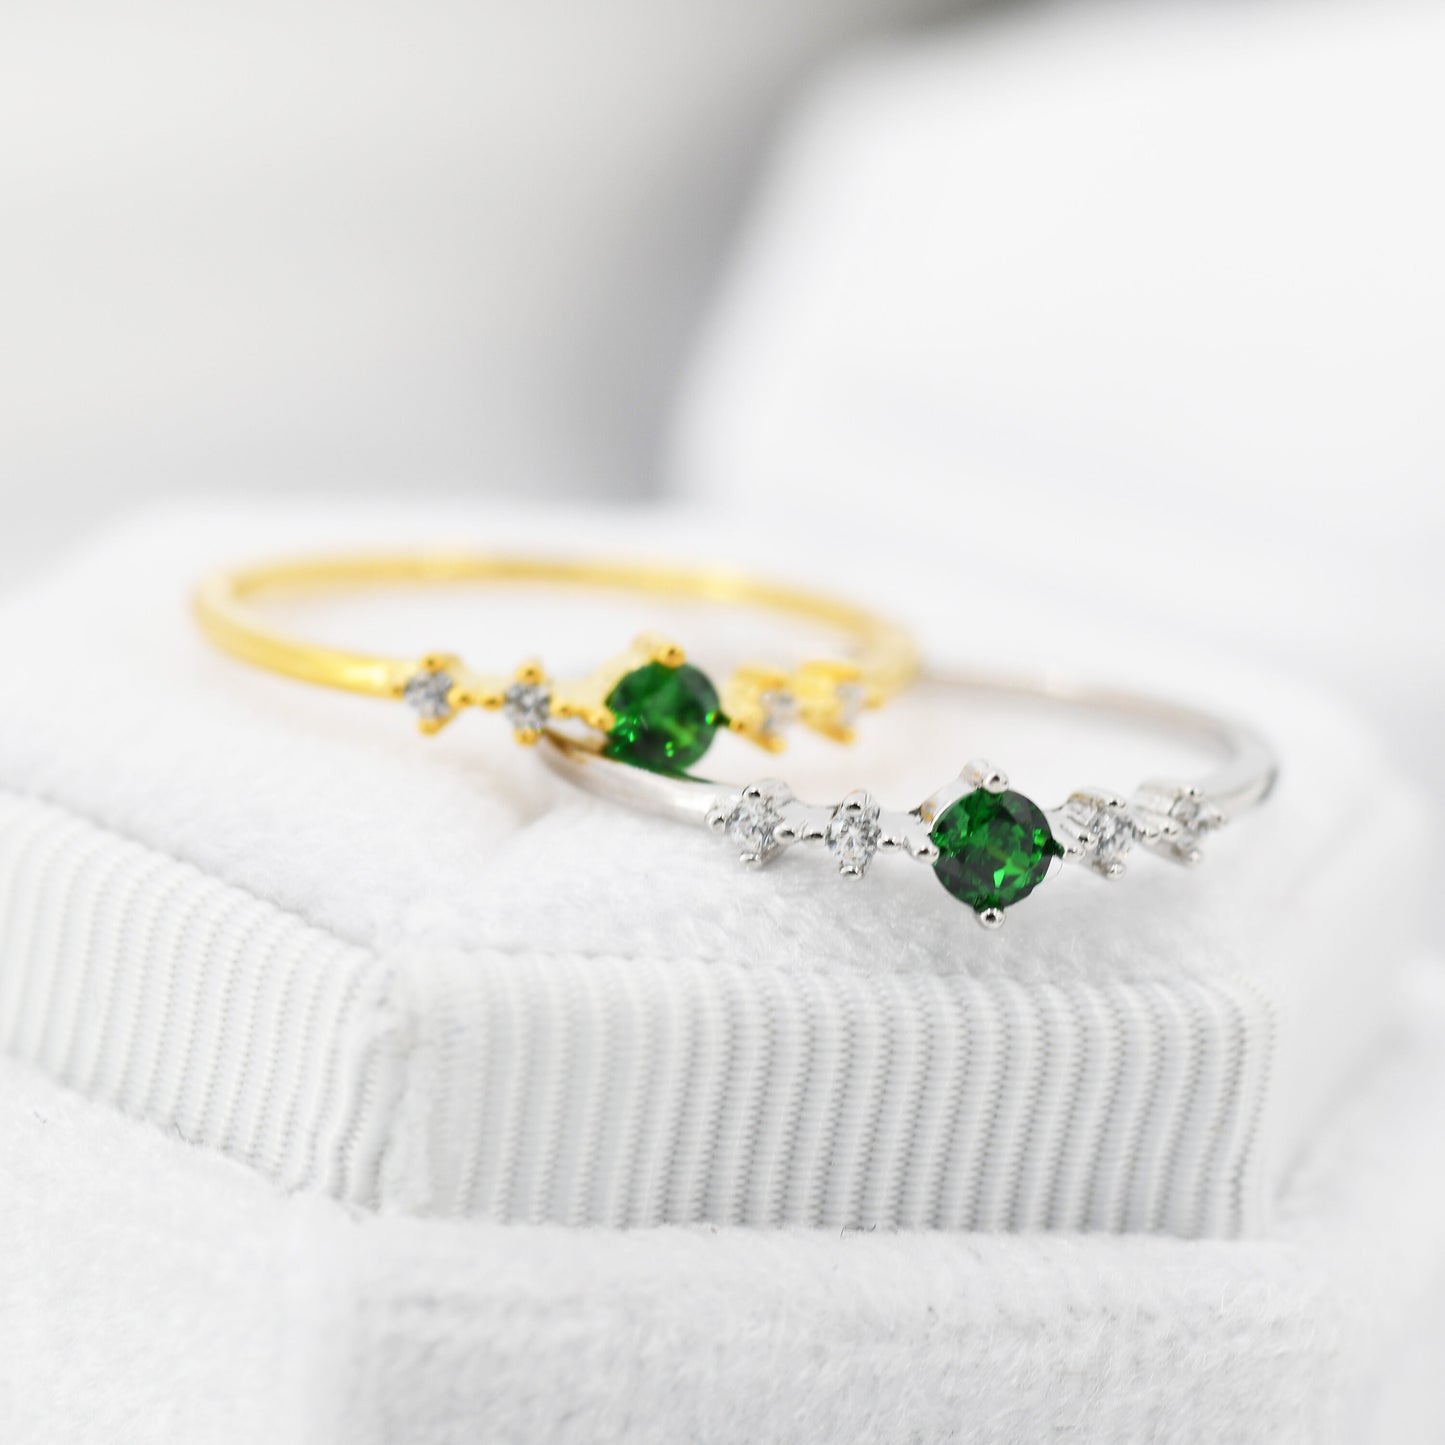 Vintage Inspired Emerald Green CZ Ring in Sterling Silver, Marquise Ring, Delicate Emerald Ring, Size US 5 - 8